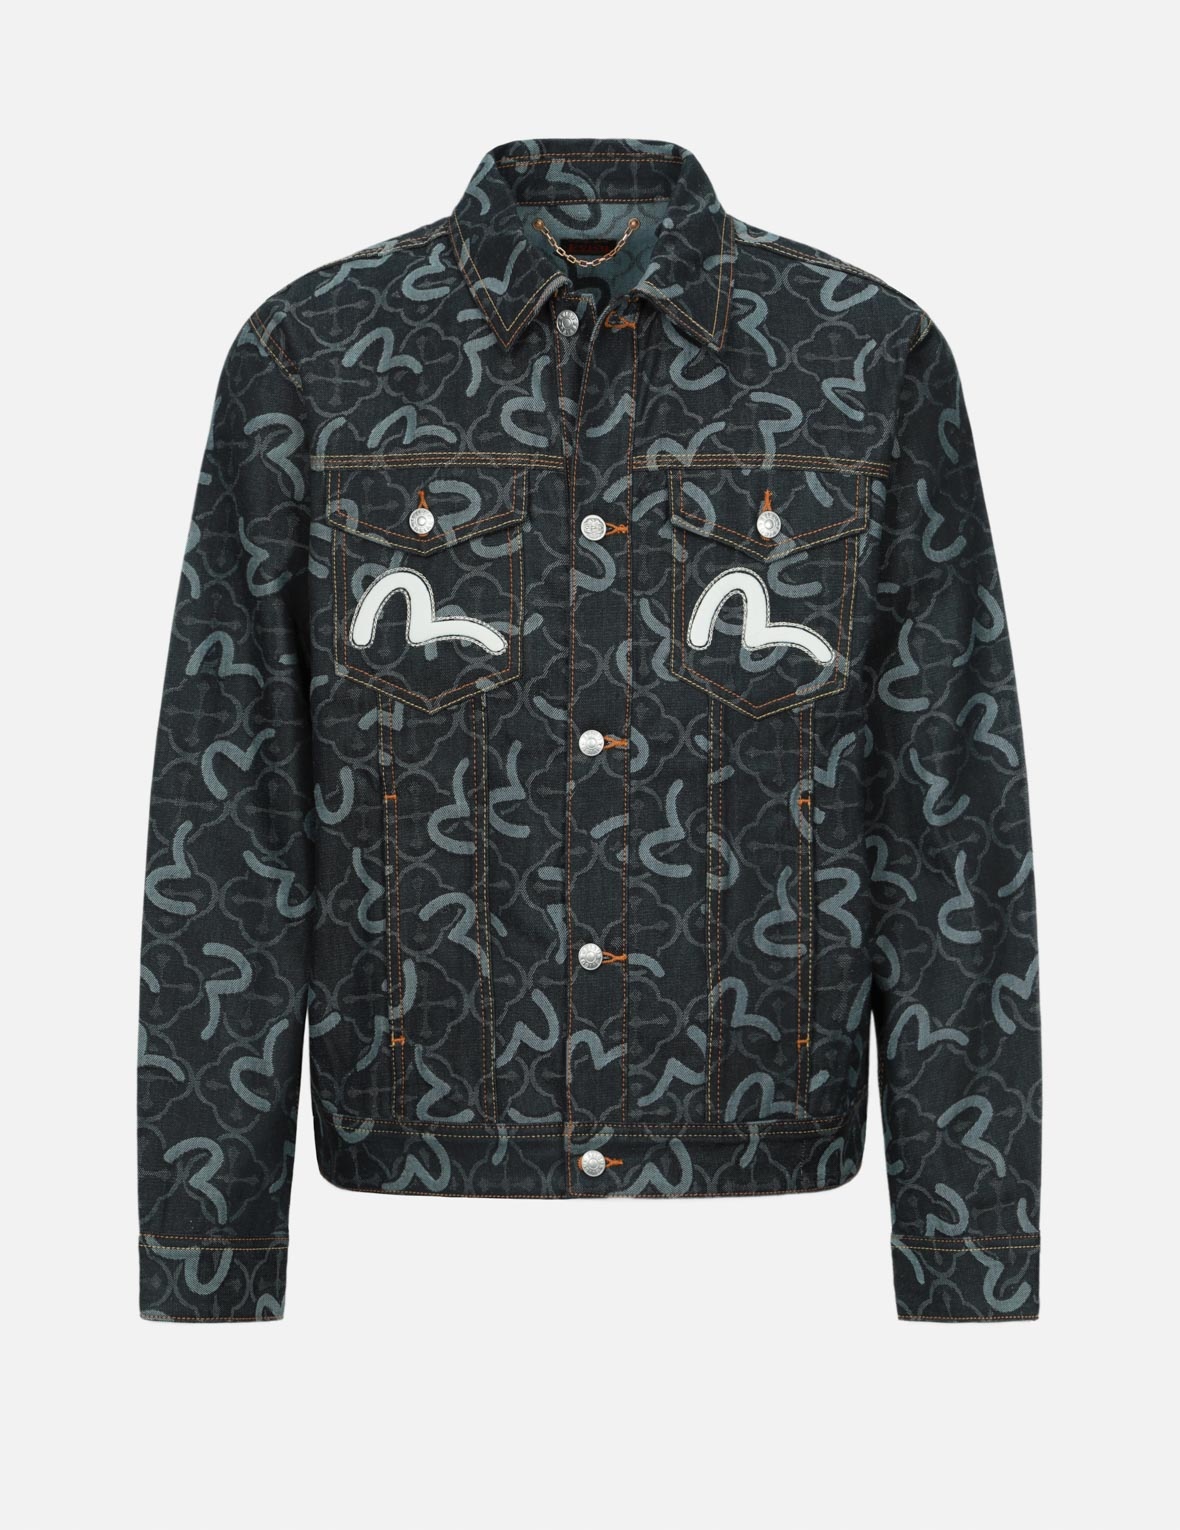 ALLOVER SEAGULL AND KAMON JACQUARD RELAX FIT DENIM JACKET - 1